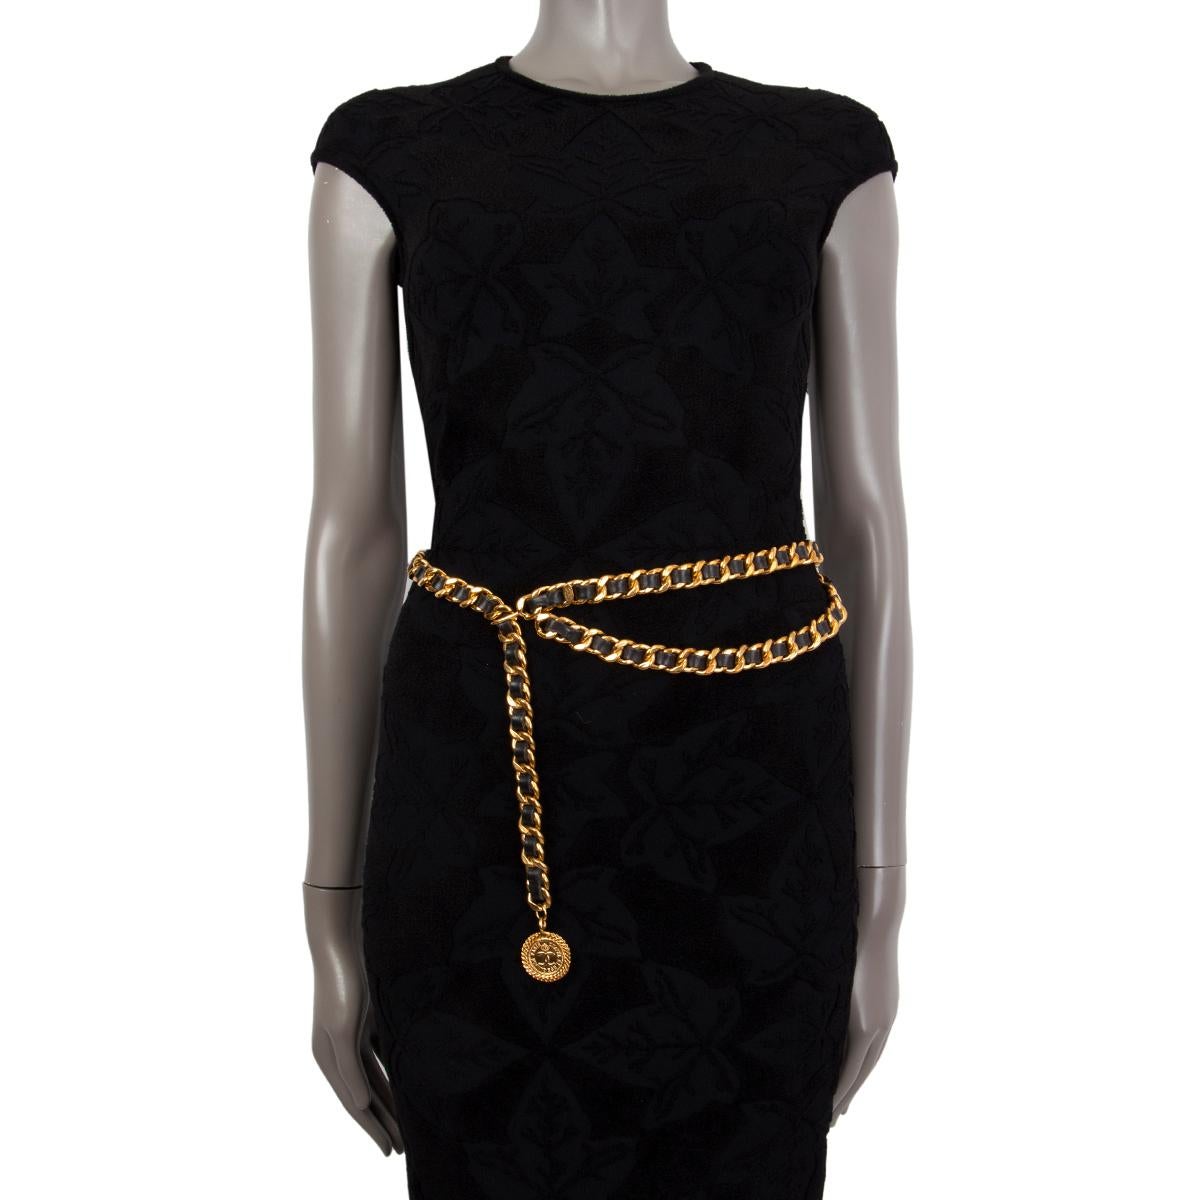 CHANEL black leather & gold CHAIN Belt ONE SIZE 1